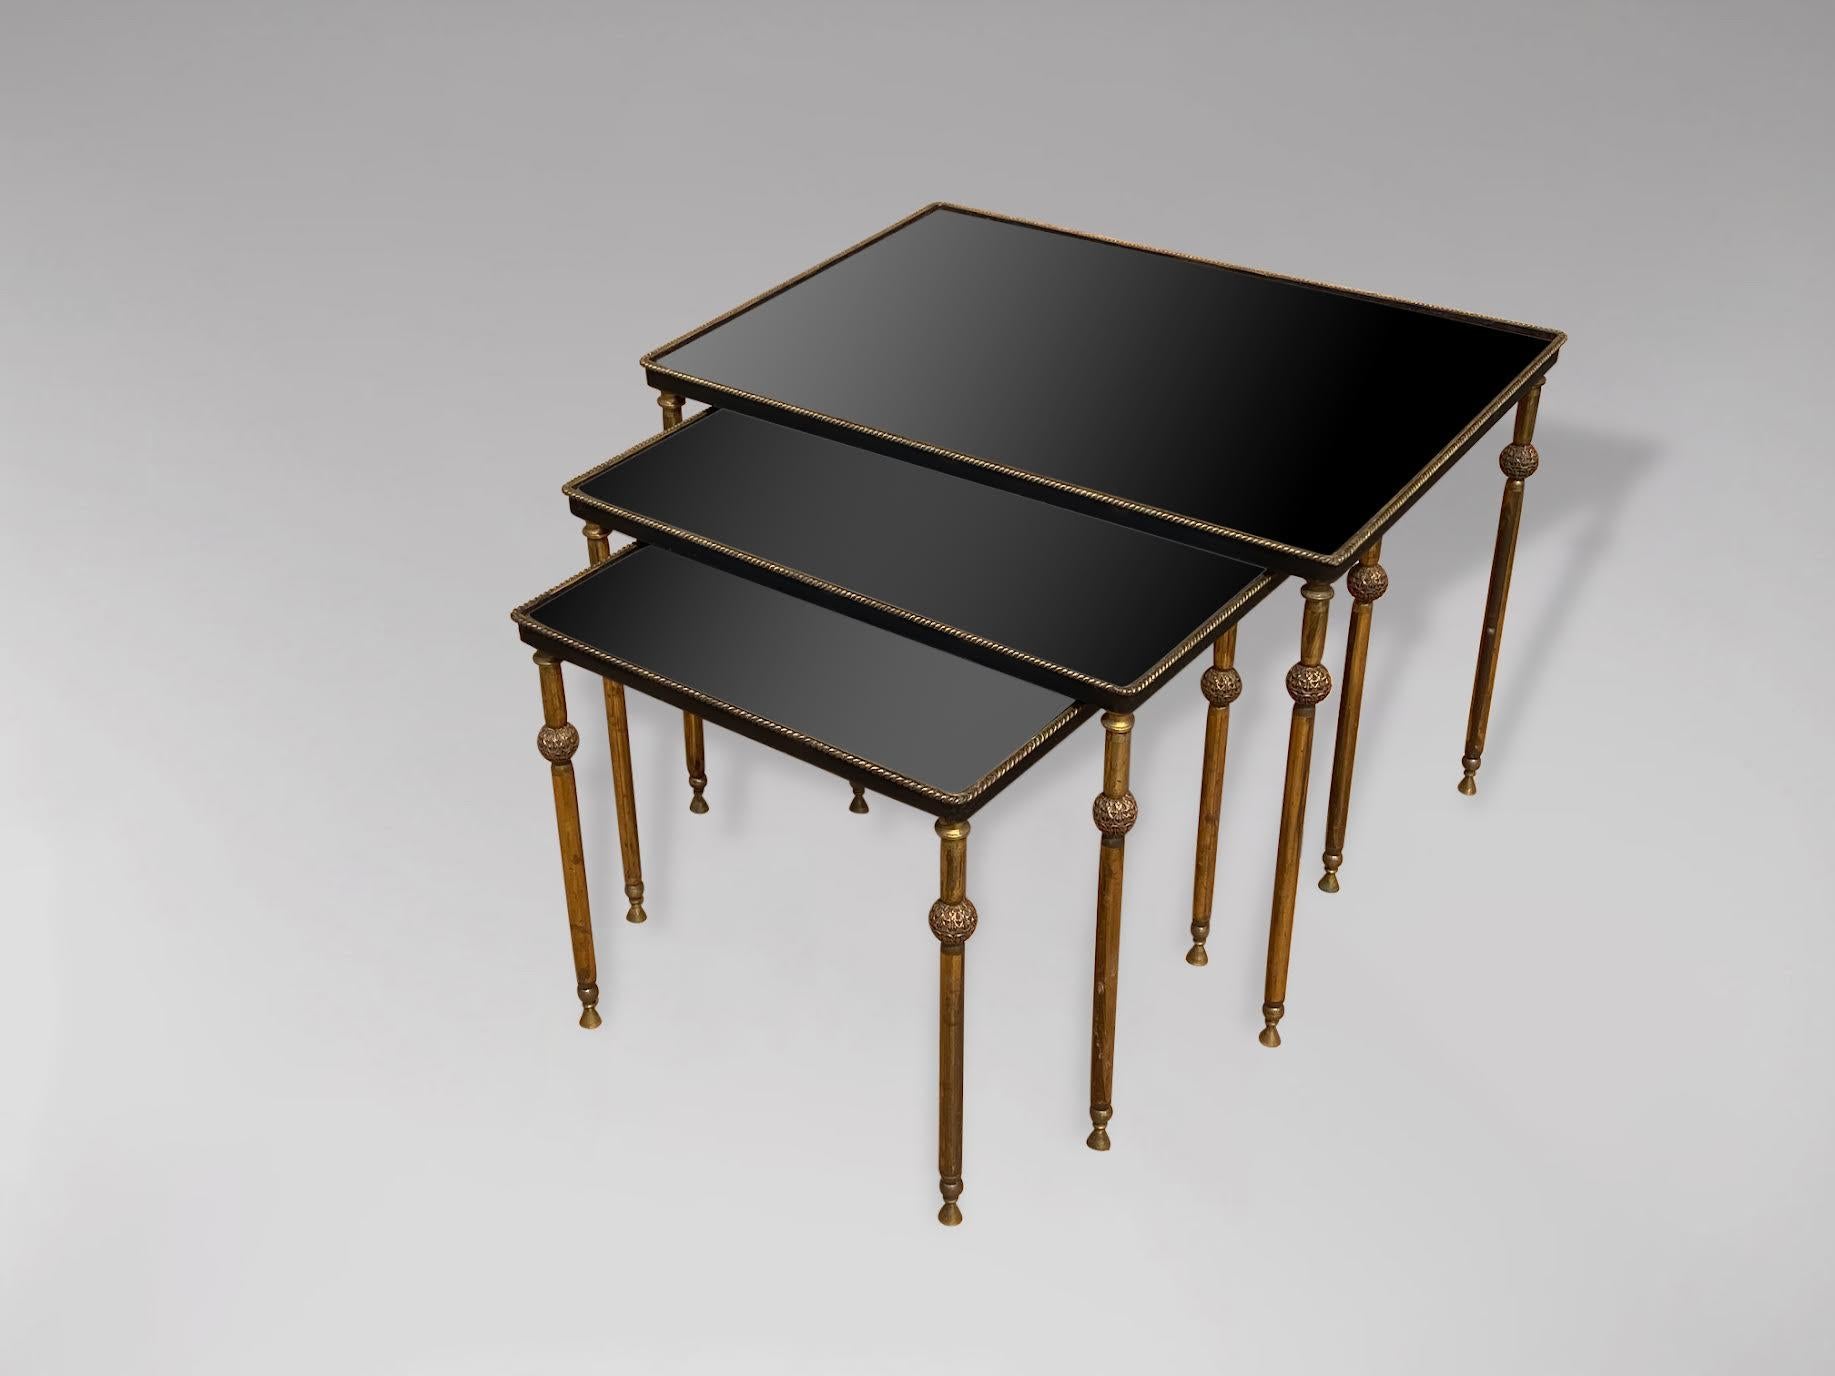 A stunning set of 3 mid 20th century rectangular brass frame nest of tables with inset black lacquered mirror tops. In very good vintage condition. These tables were made in France and date from around the 1950s. 

Dimensions of the large table